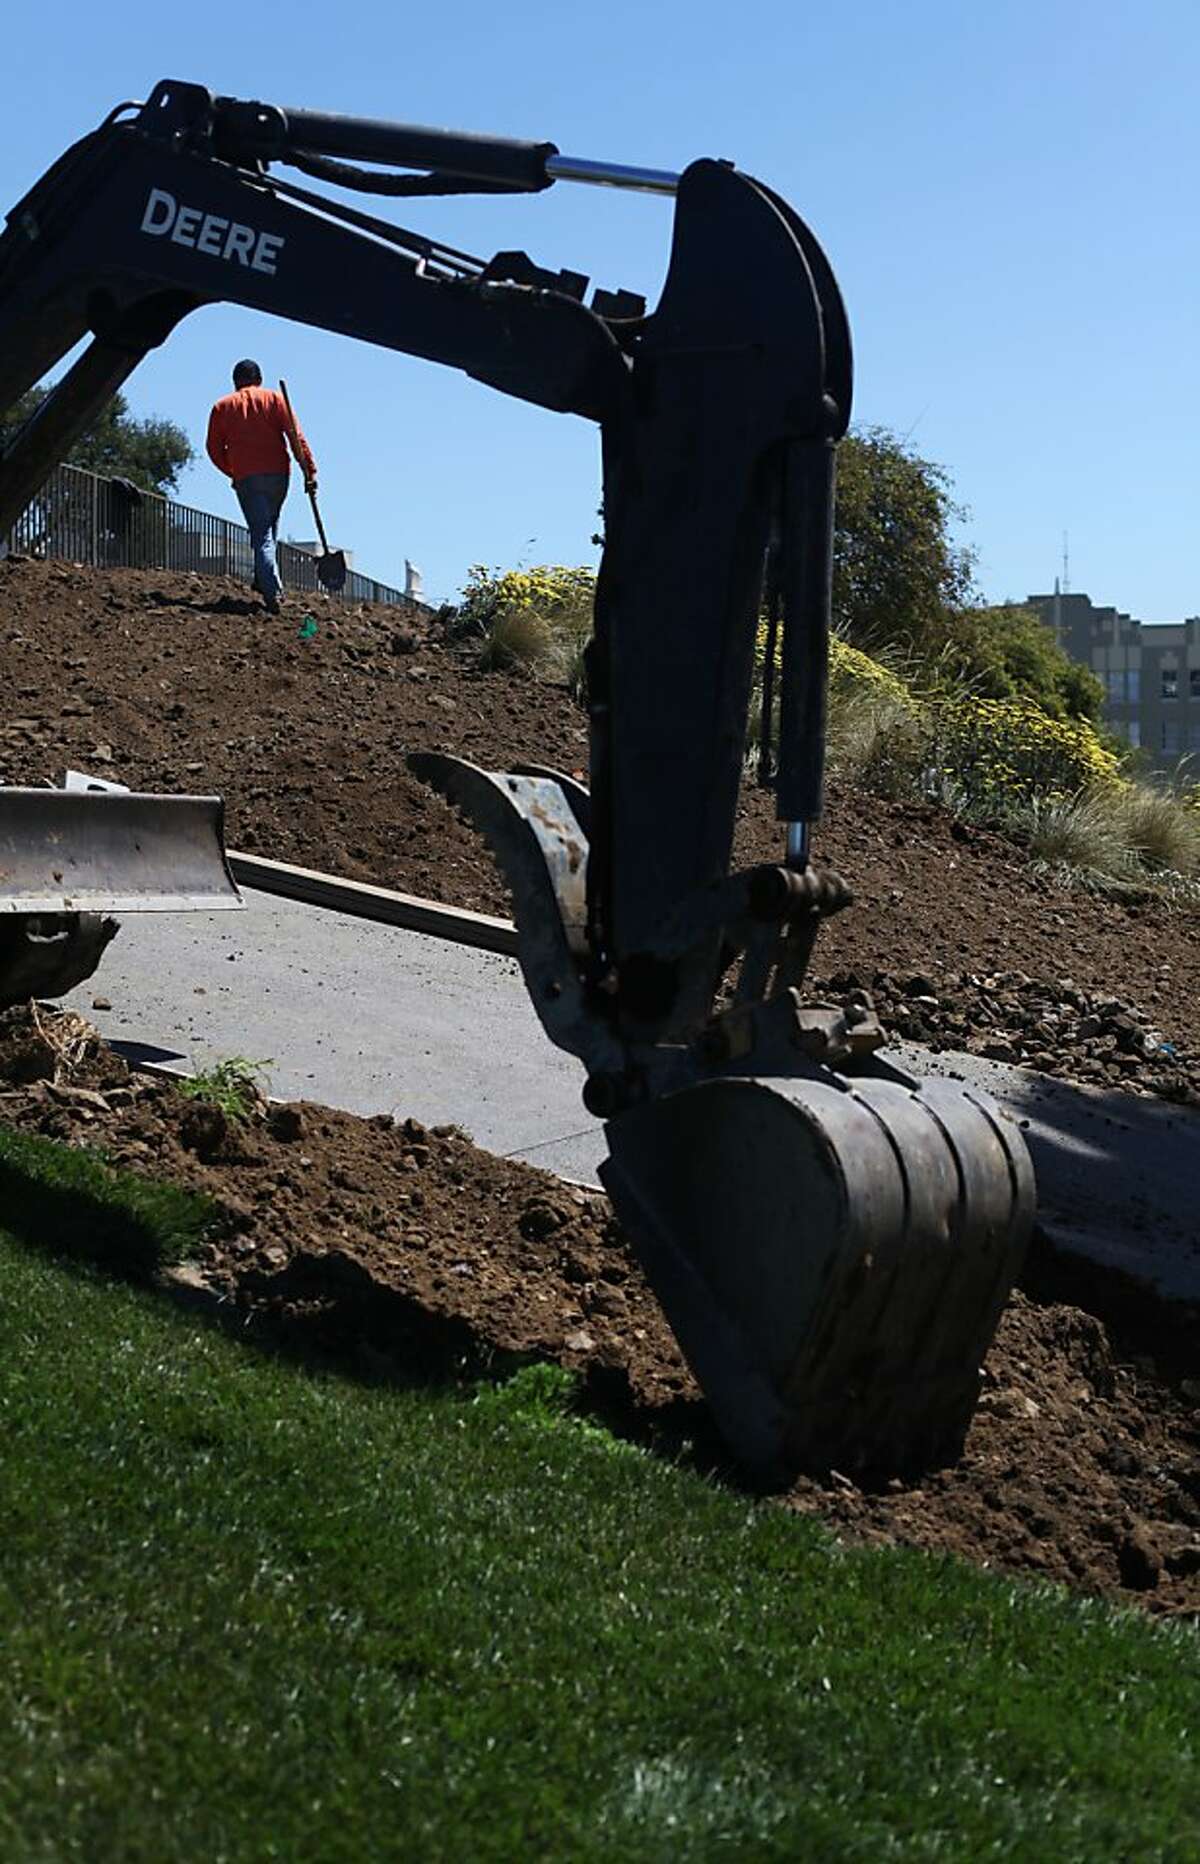 Francisco Magana walks up a hill on the south side of Lafayette Park on May 30, 2013 in San Francisco, Calif. Magana was grading soil in preparation for planting more flowers. Lafayette Park is slated to reopen June 8, 2013.